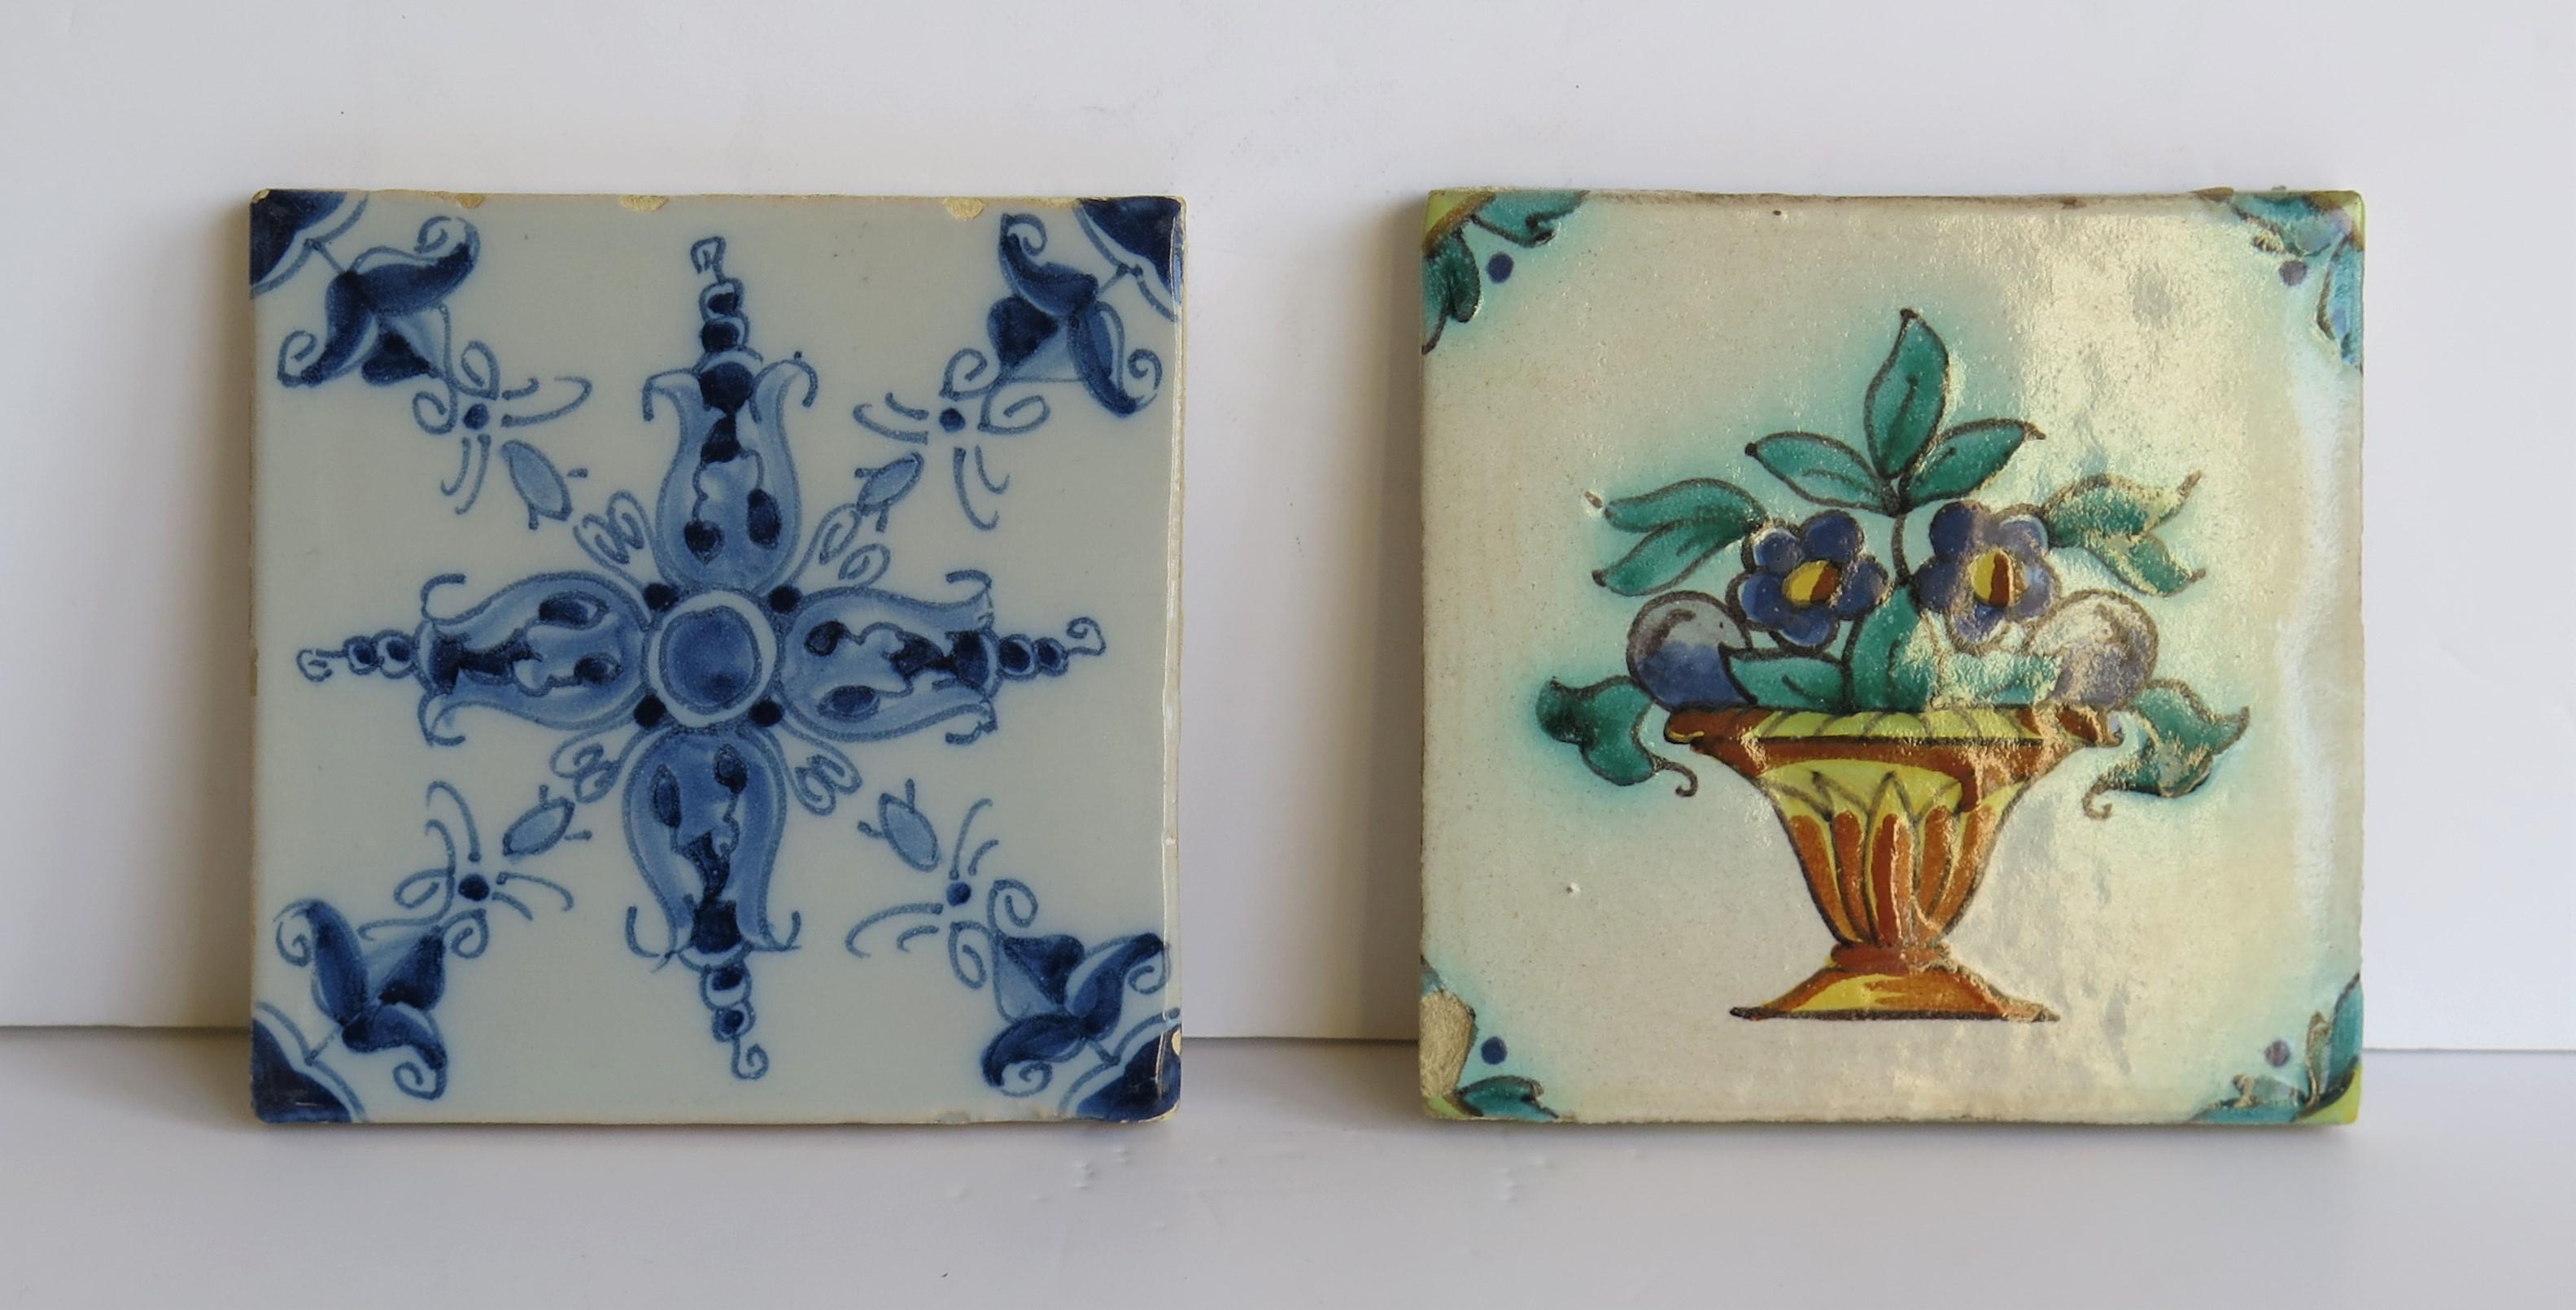 Dutch Colonial Two 19th Century Dutch Delft Ceramic Wall Tiles Hand Painted Floral Patterns